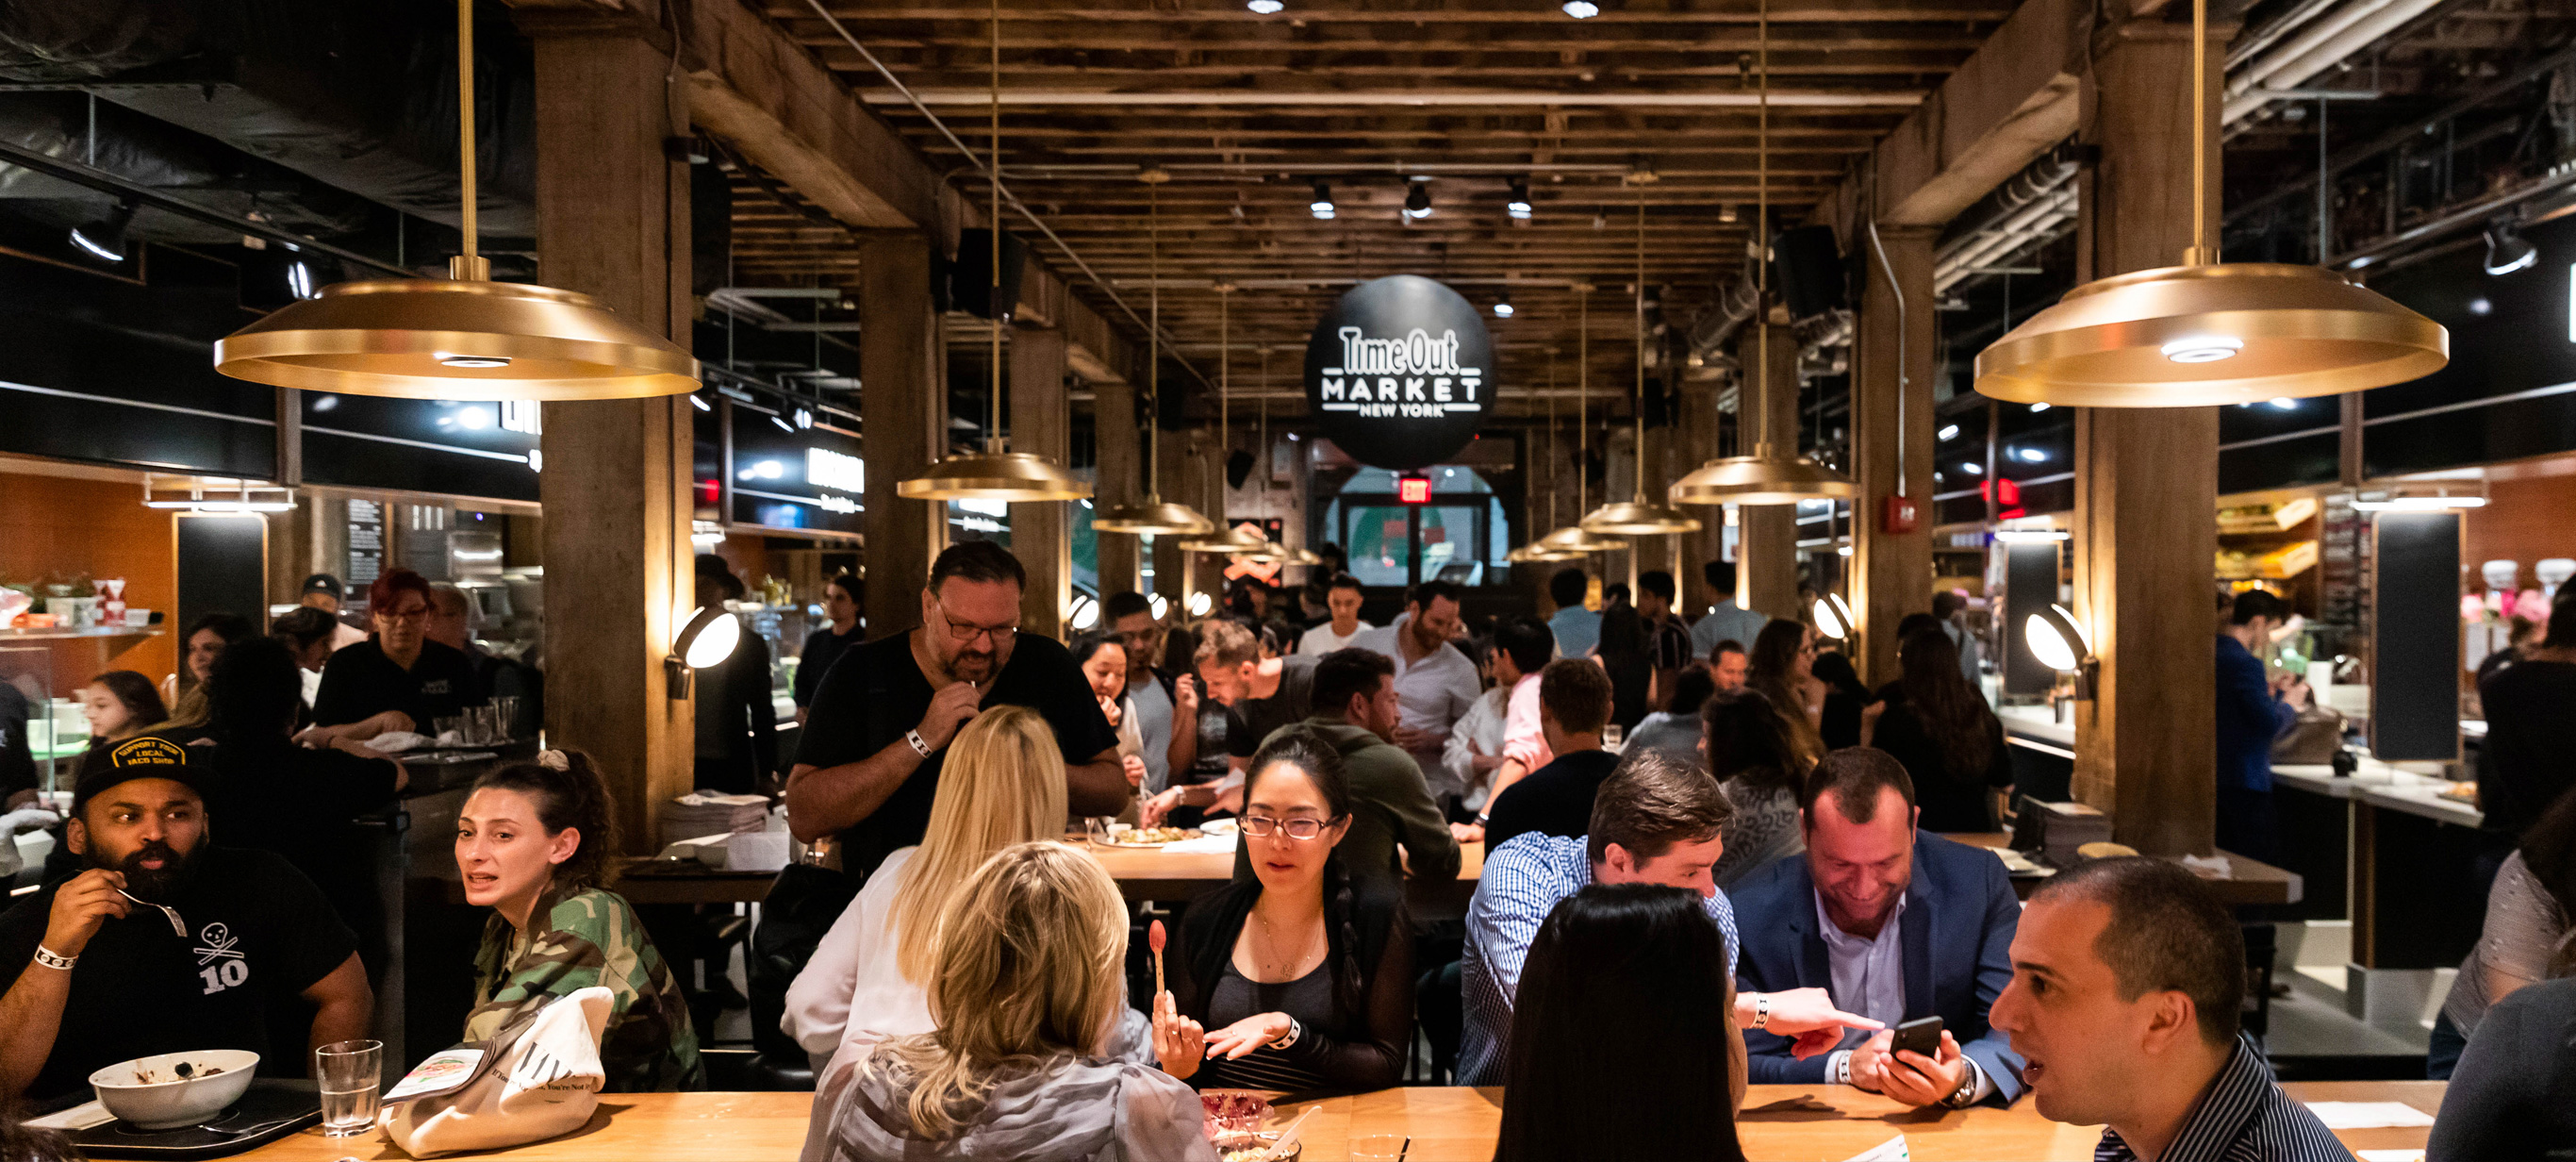 Busy scene of Time Out Market New York with diners at communal tables